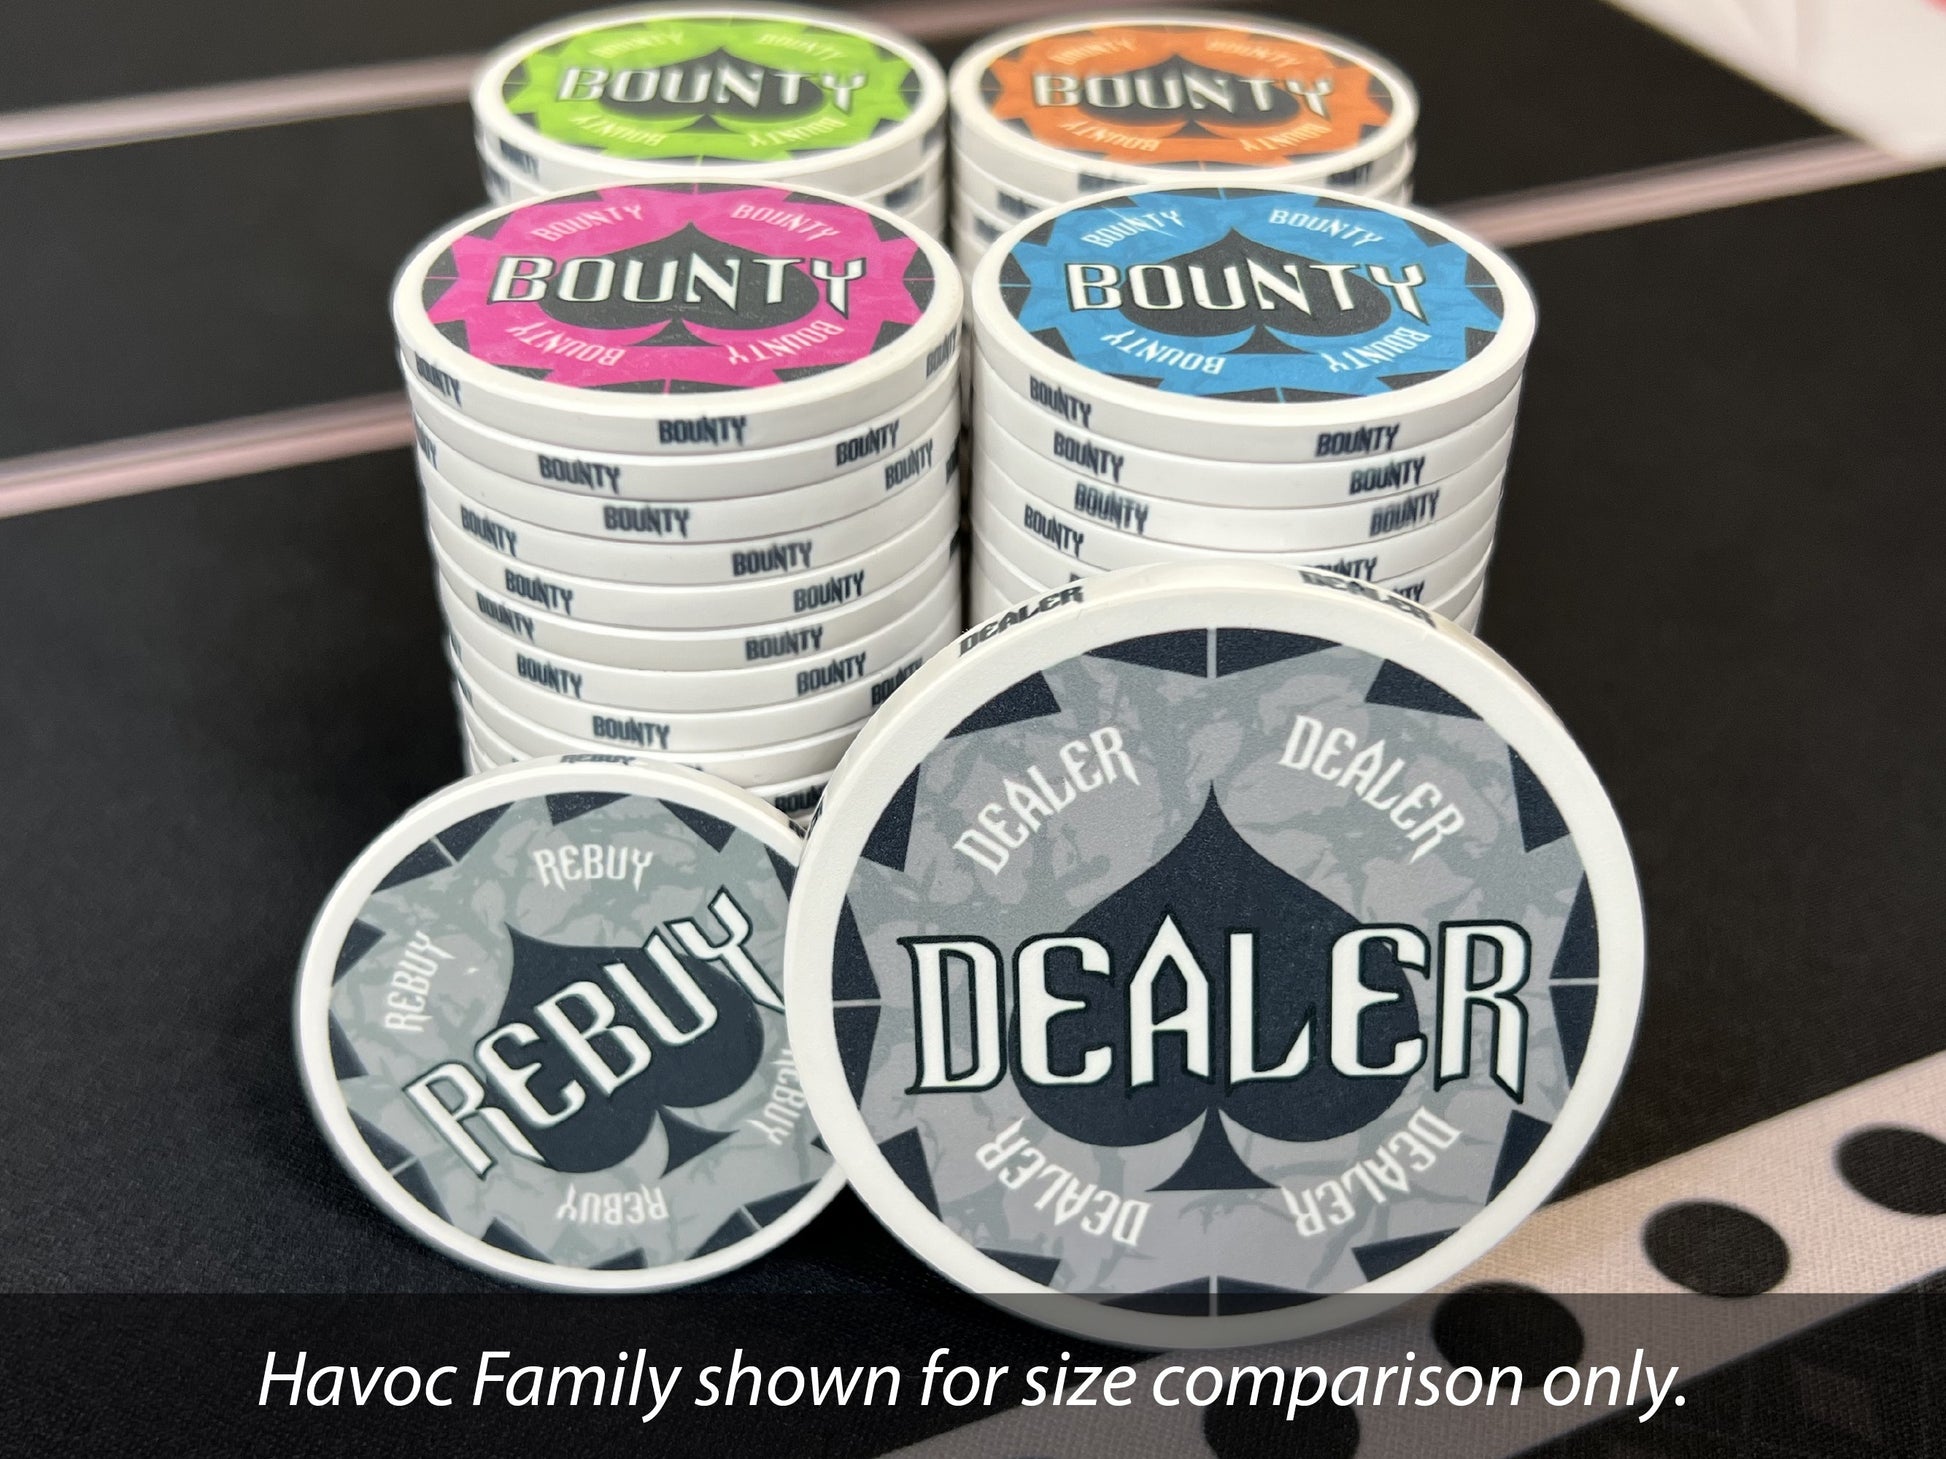 Also available for your Havoc Rebuy Chips: matching bounty chips and dealer buttons. Shown are the 39mm multi-colored Havoc Bounty Chips and the 60mm Ceramic Havoc Dealer Button. A 49mm dealer button is also available, but not shown.